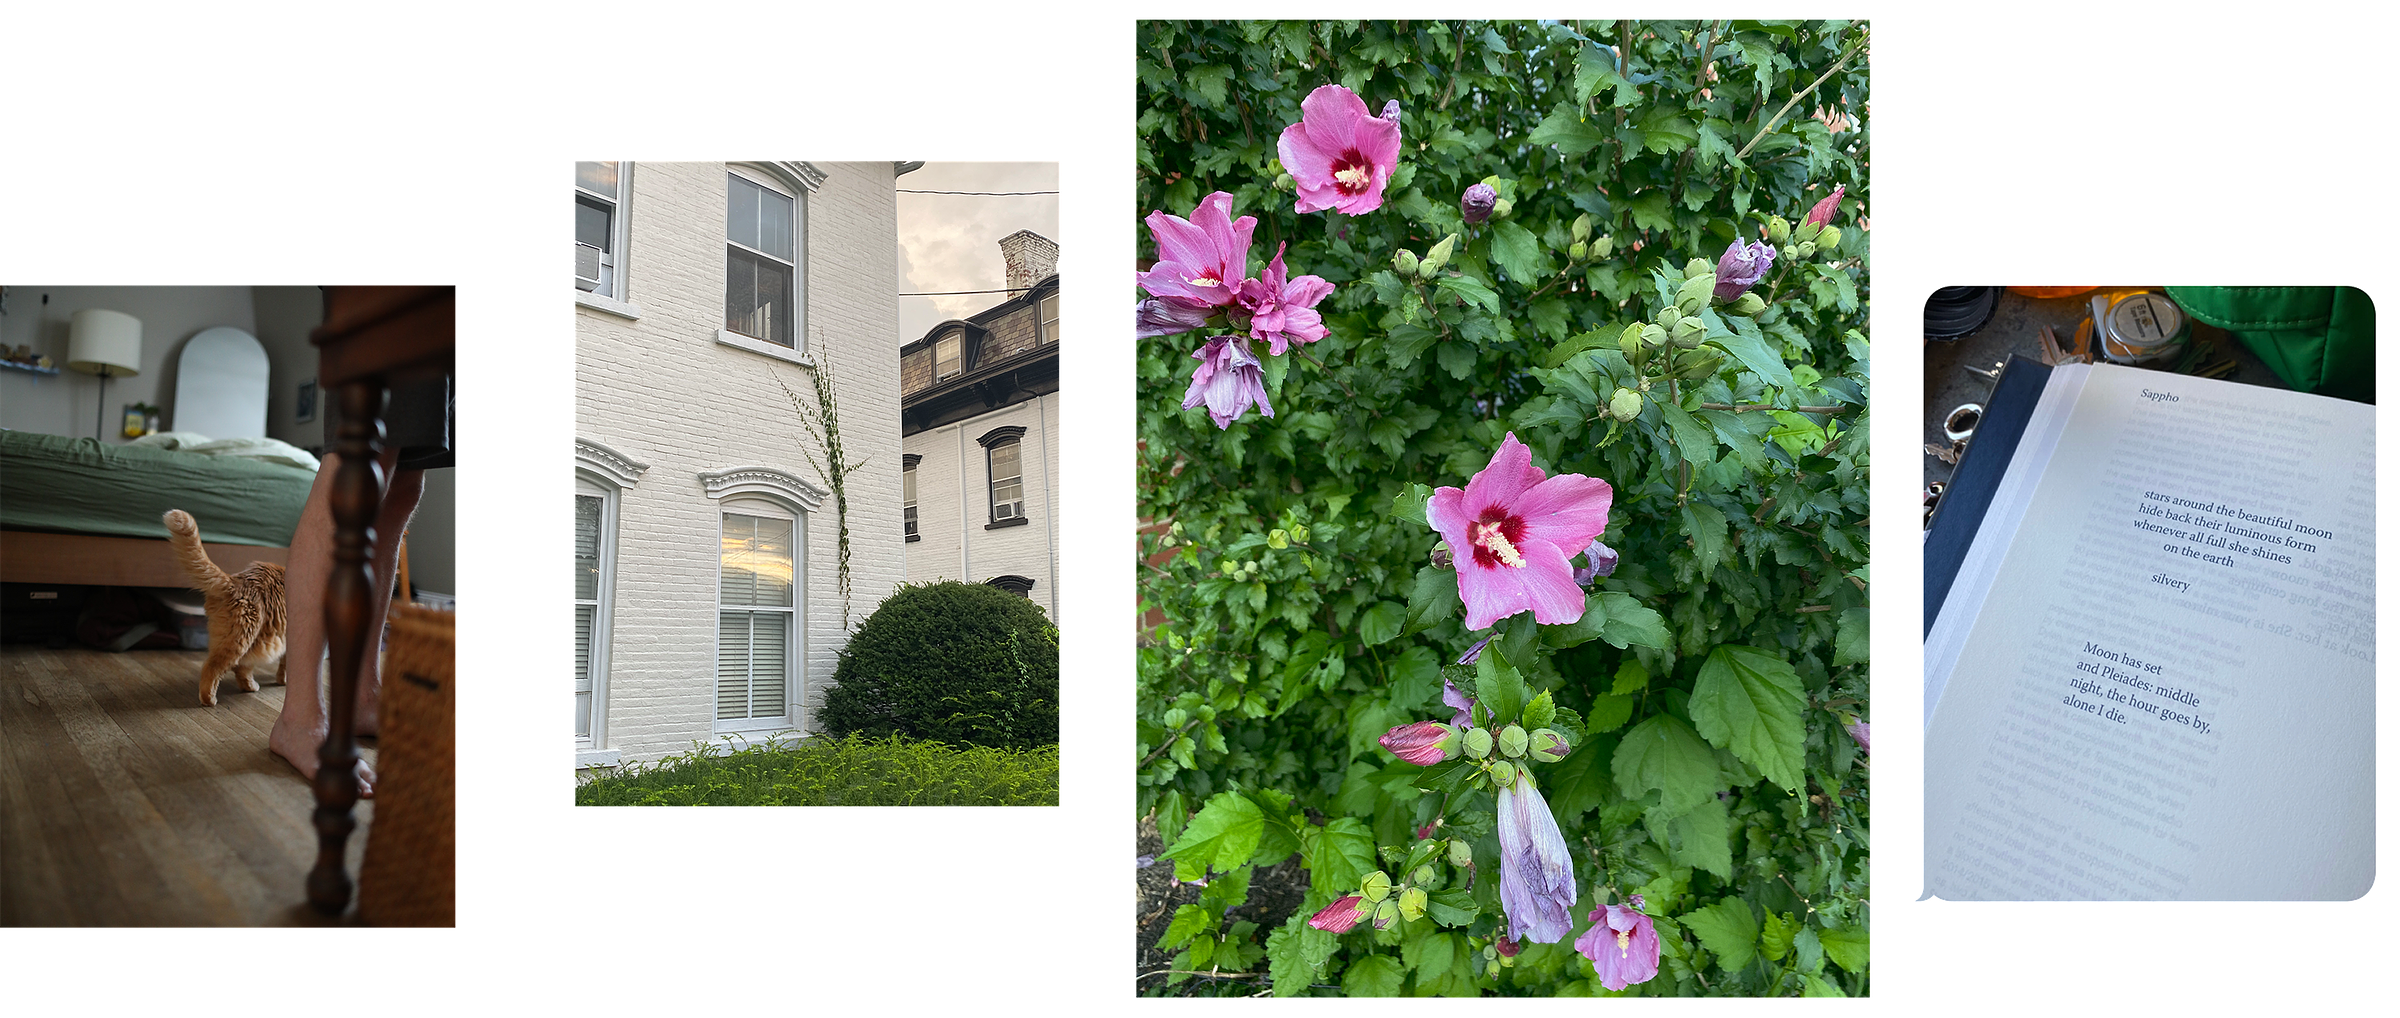 4 images of different sizes arranged in a line. from left to right, a photograph of an orange cat walking past a set of bare legs in front of a bed; a photograph of a white building with greenery growing up the wall; a photograph of pink flowers opening up against a green bed of grass and leaves; an image sent via text of a Sappho poem about the moon.